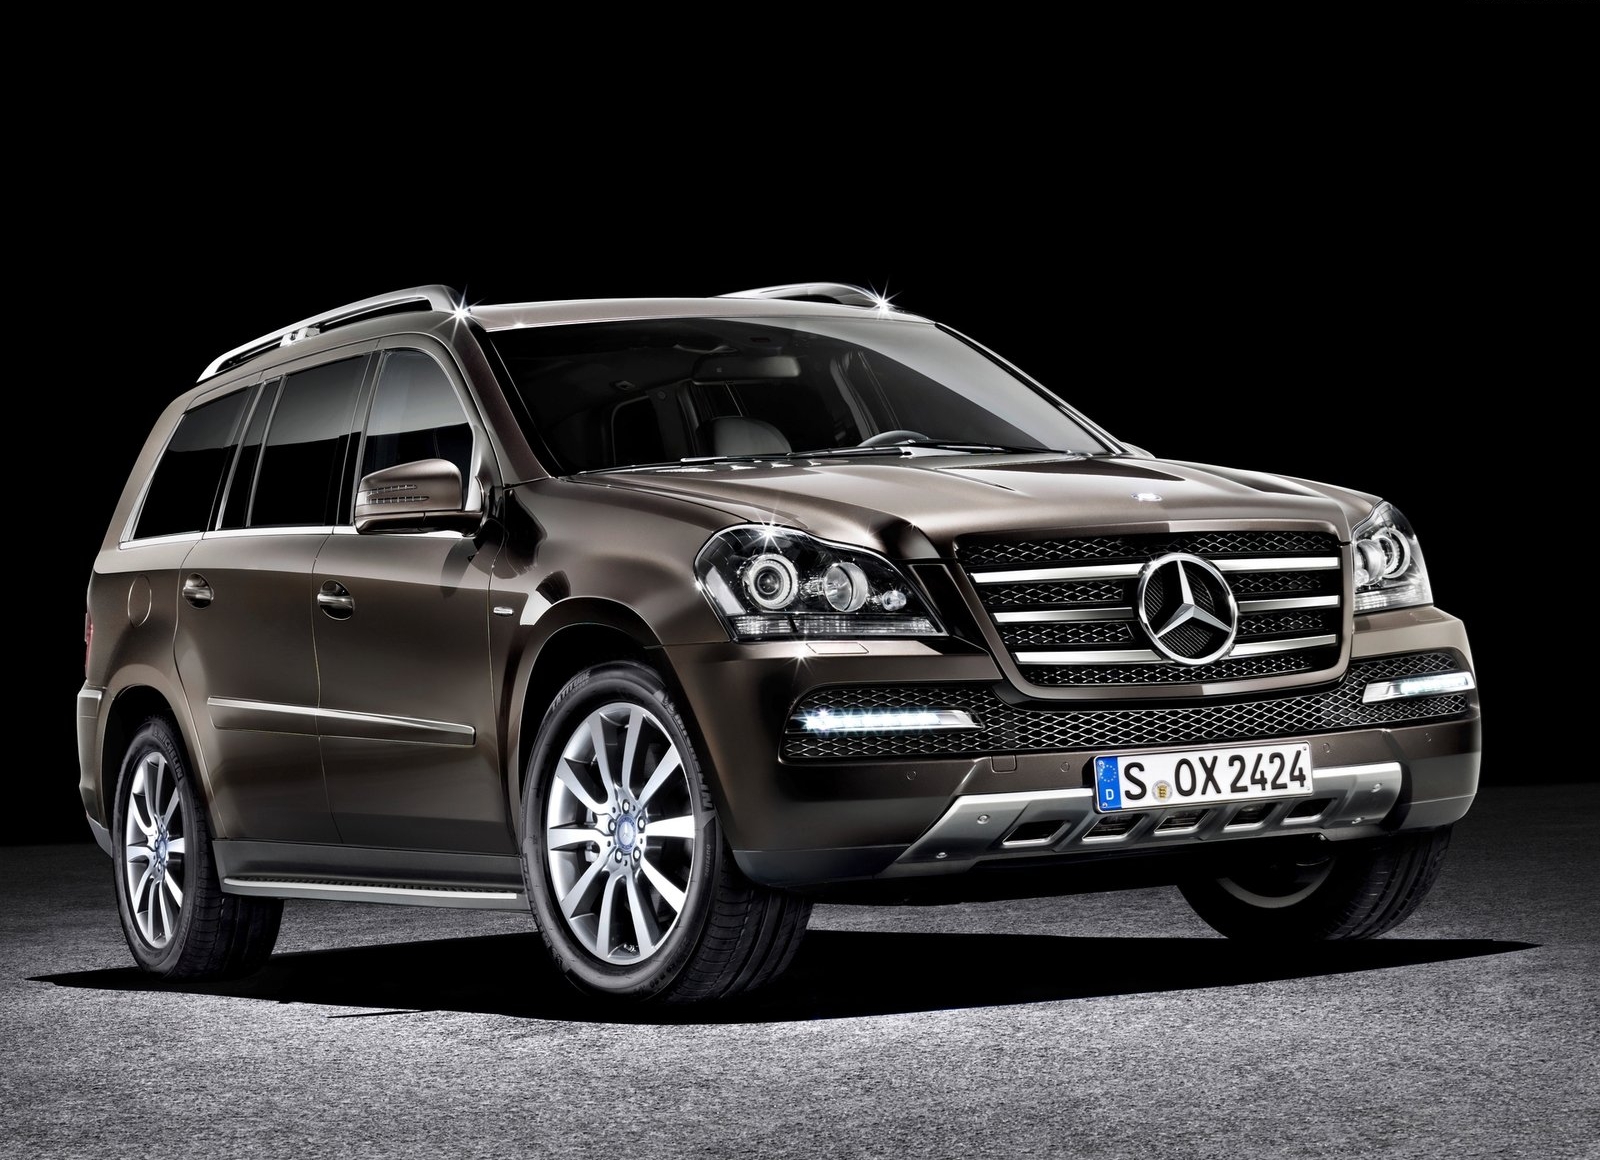 2012 Mercedes-Benz GL 550 4MATIC Full Specs, Features and Price | CarBuzz